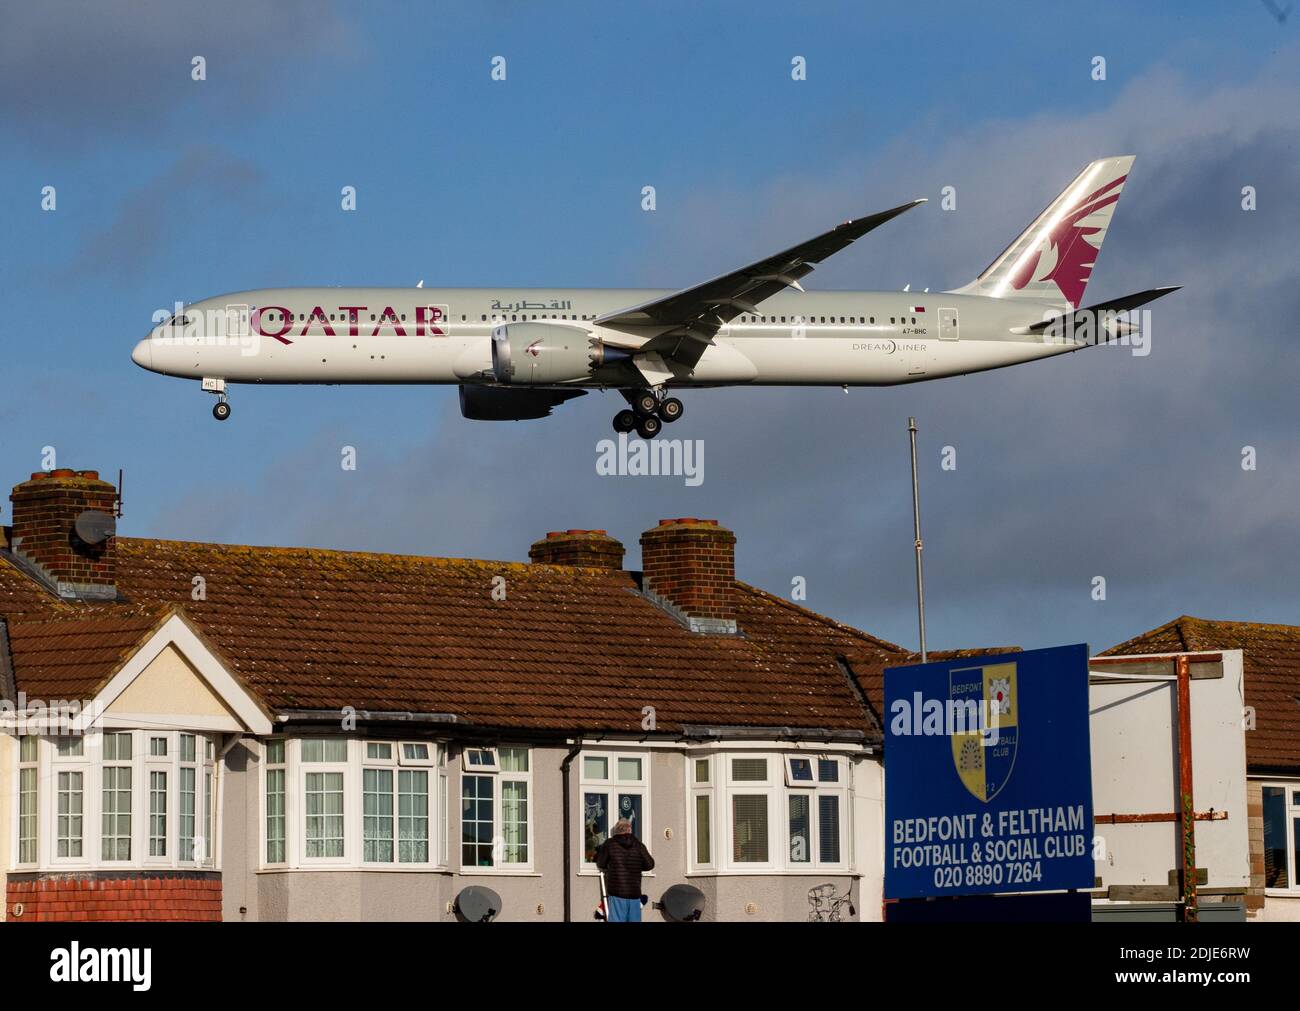 A Qatar Airways airplane coming in to land at Heathrow airport. Stock Photo